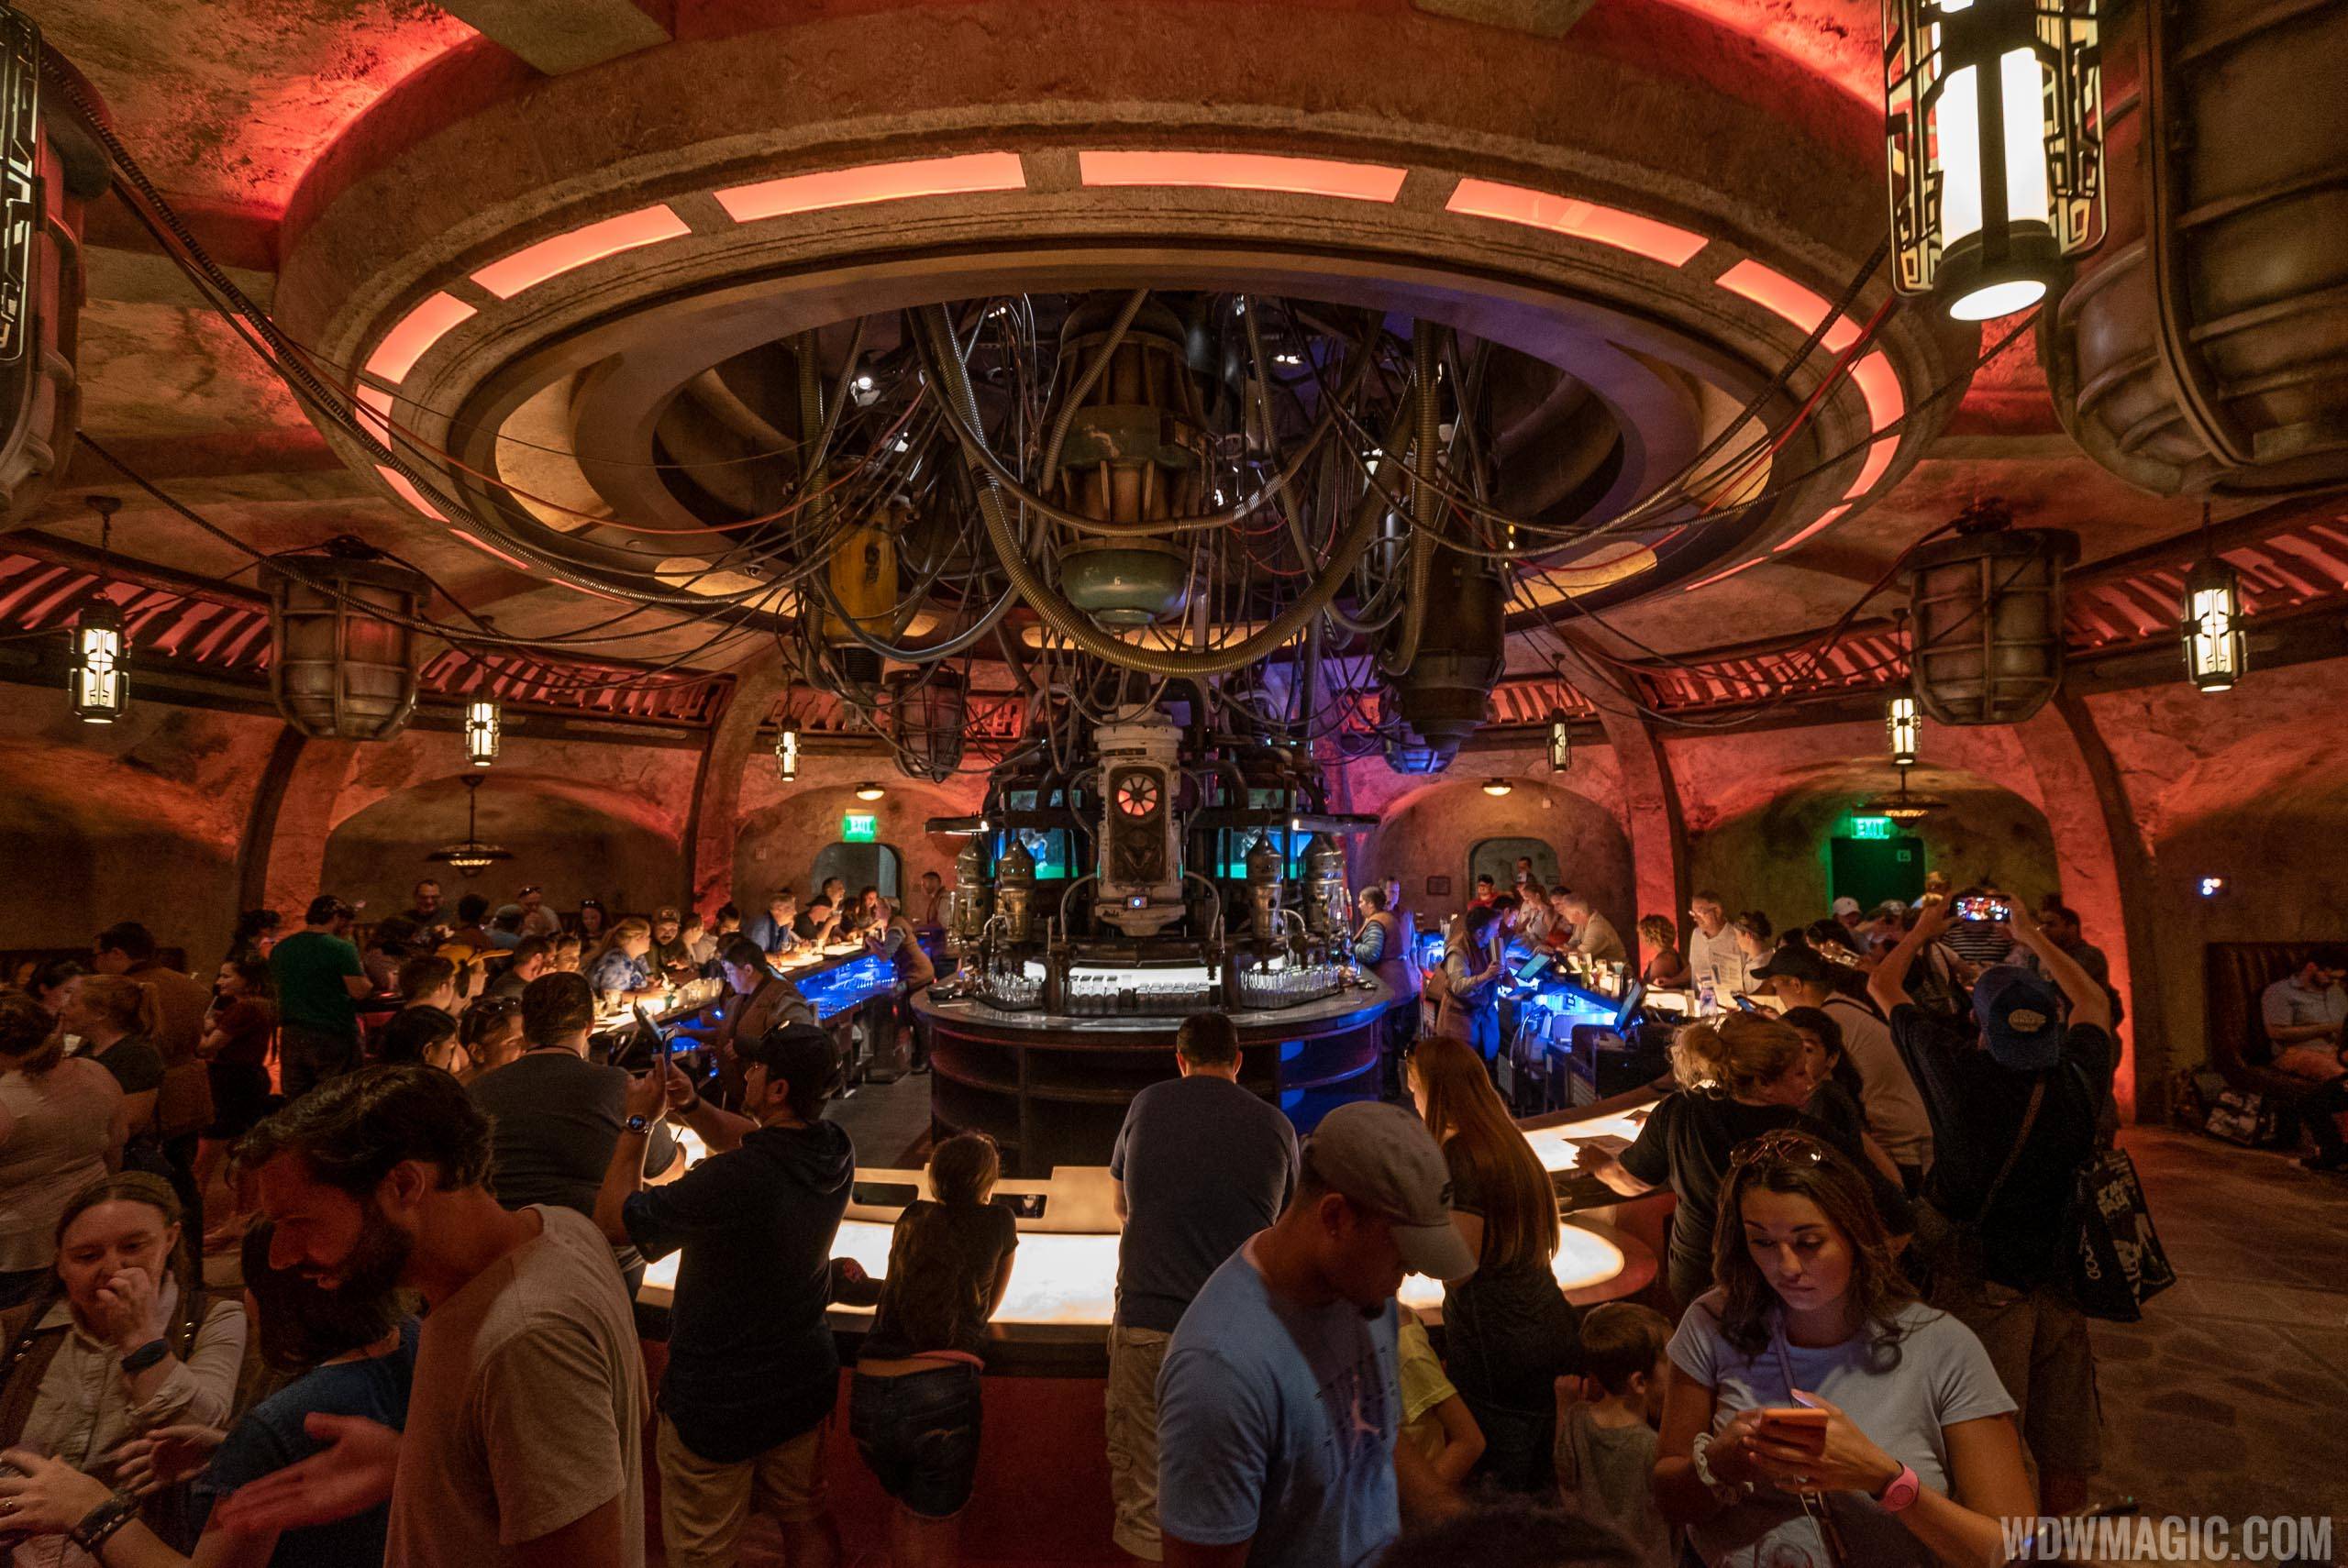 REVIEW - Oga's Cantina in Star Wars Galaxy's Edge at Disney's Hollywood Studios